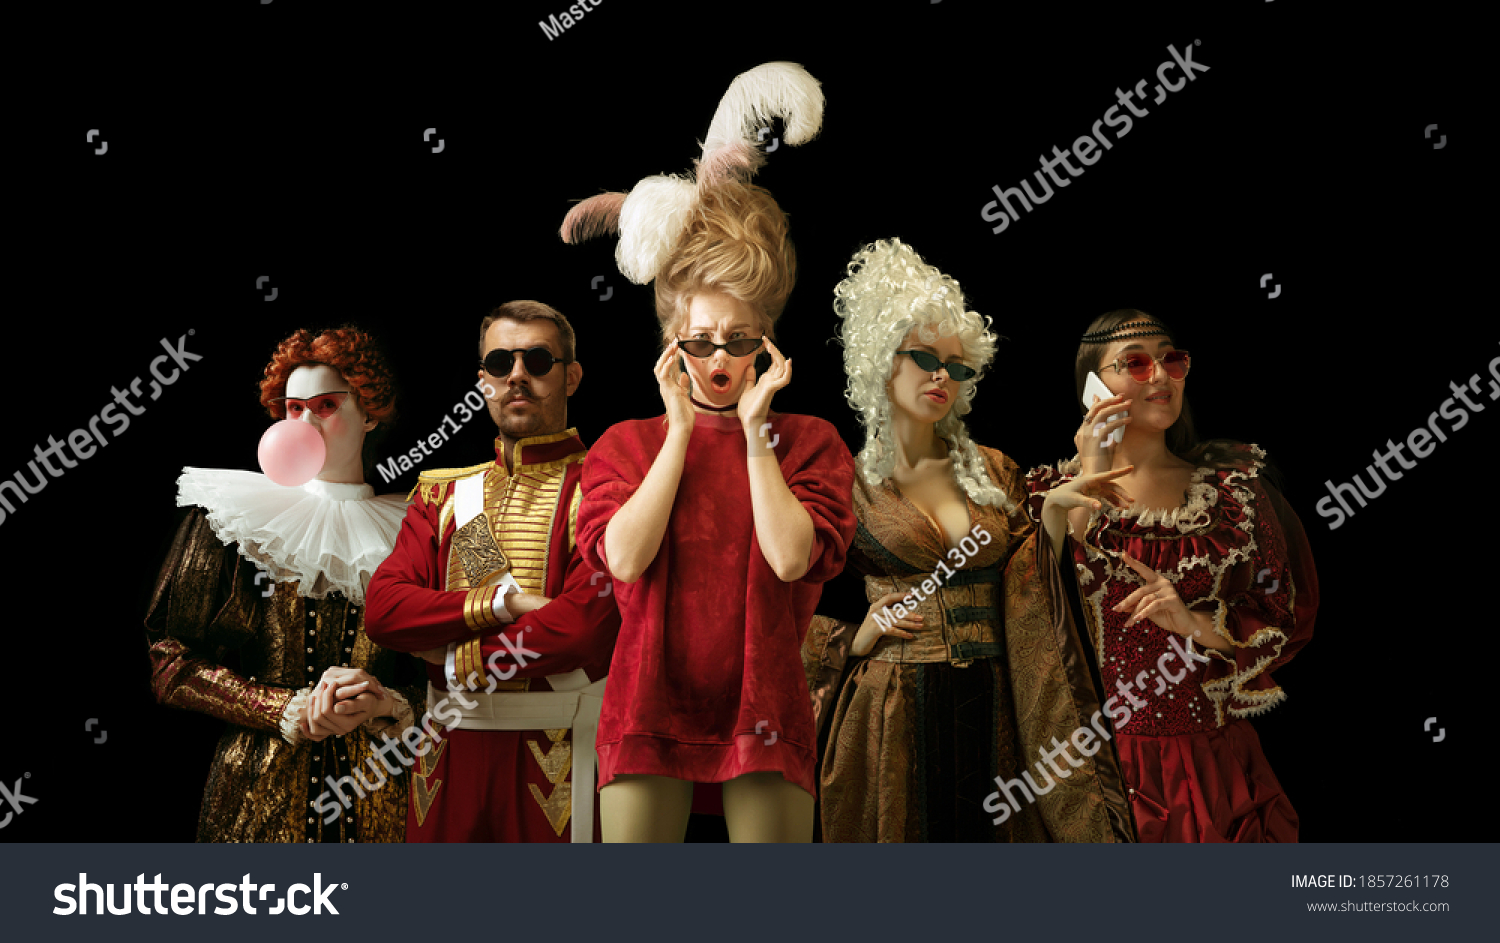 Medieval people as a royalty persons in vintage clothing and modern eyewear using devices on dark background. Concept of comparison of eras, modernity and renaissance, baroque style. Creative collage. #1857261178